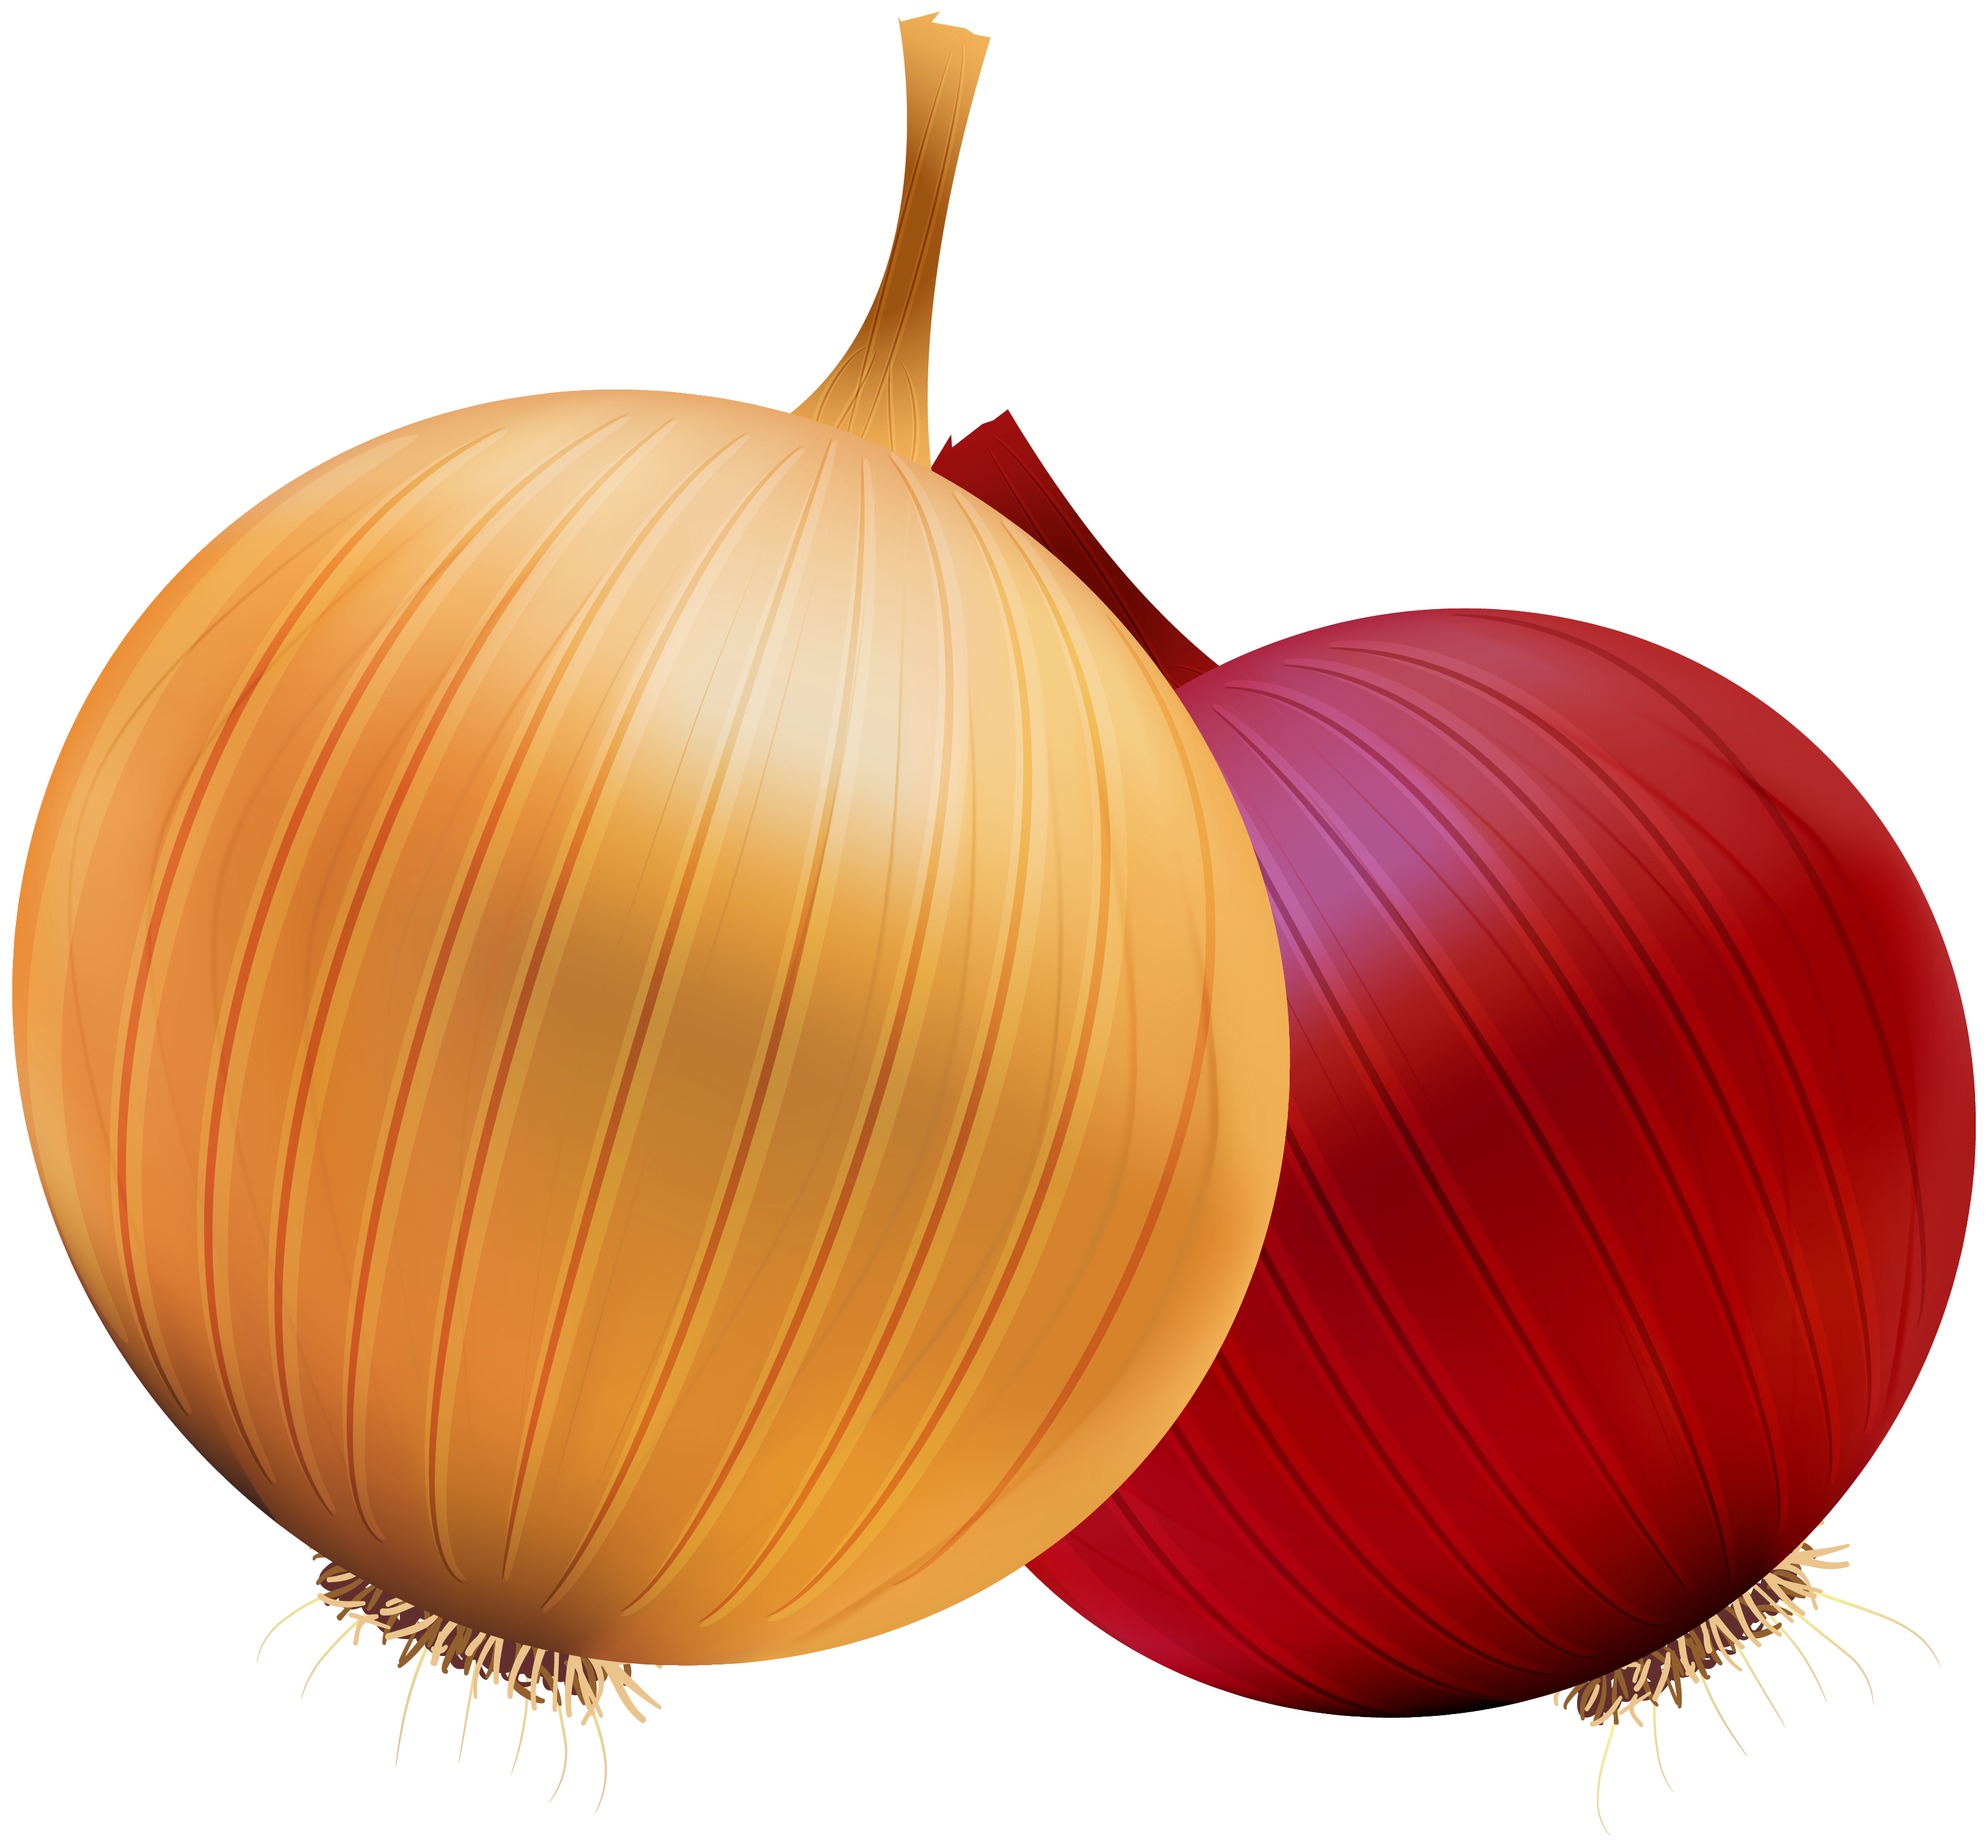 Onion and red png. Name clipart vegetable